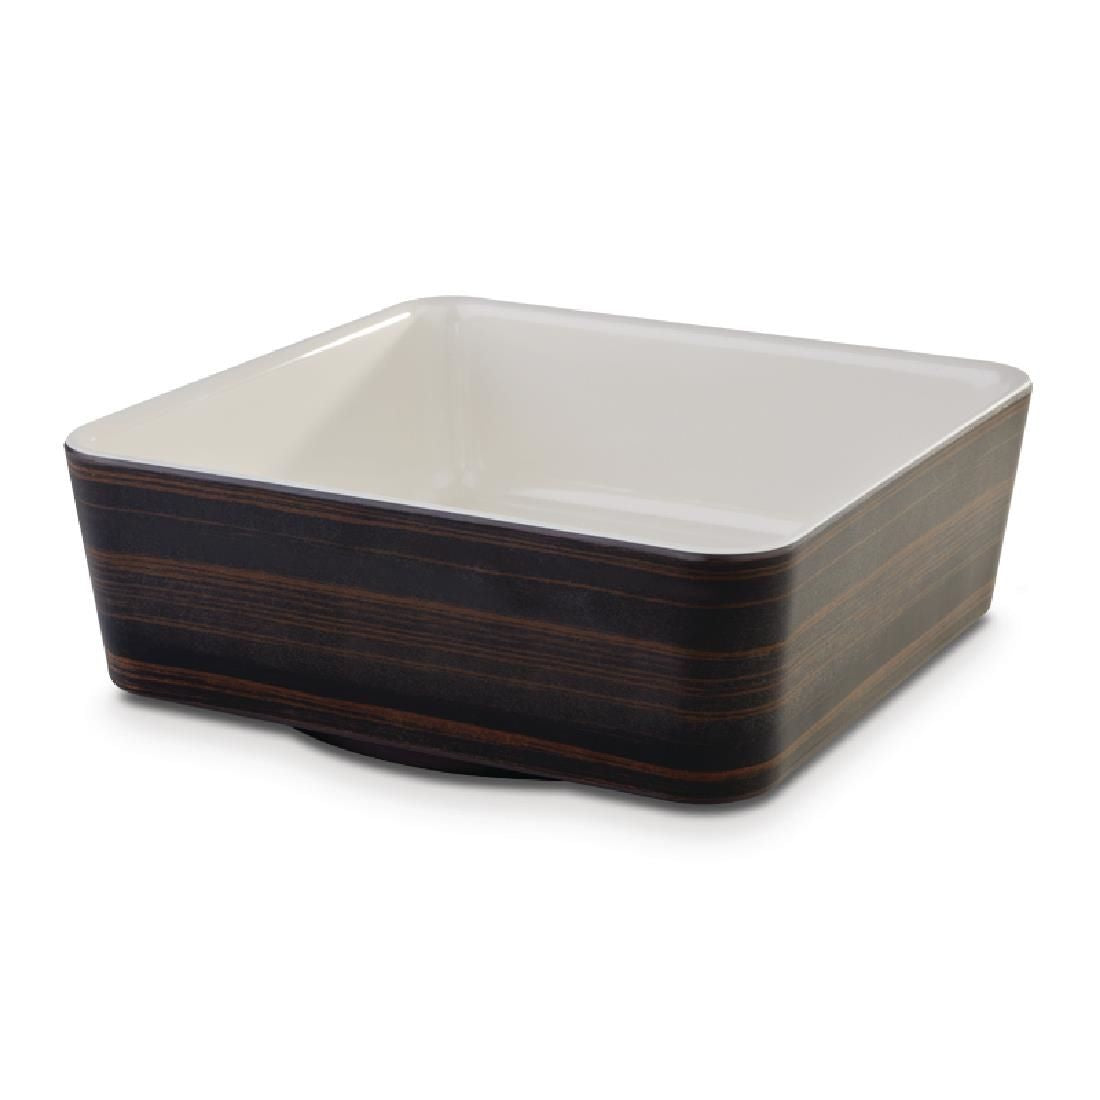 CW690 APS+ Melamine Square Bowl Oak and Cream 1.5 Ltr JD Catering Equipment Solutions Ltd